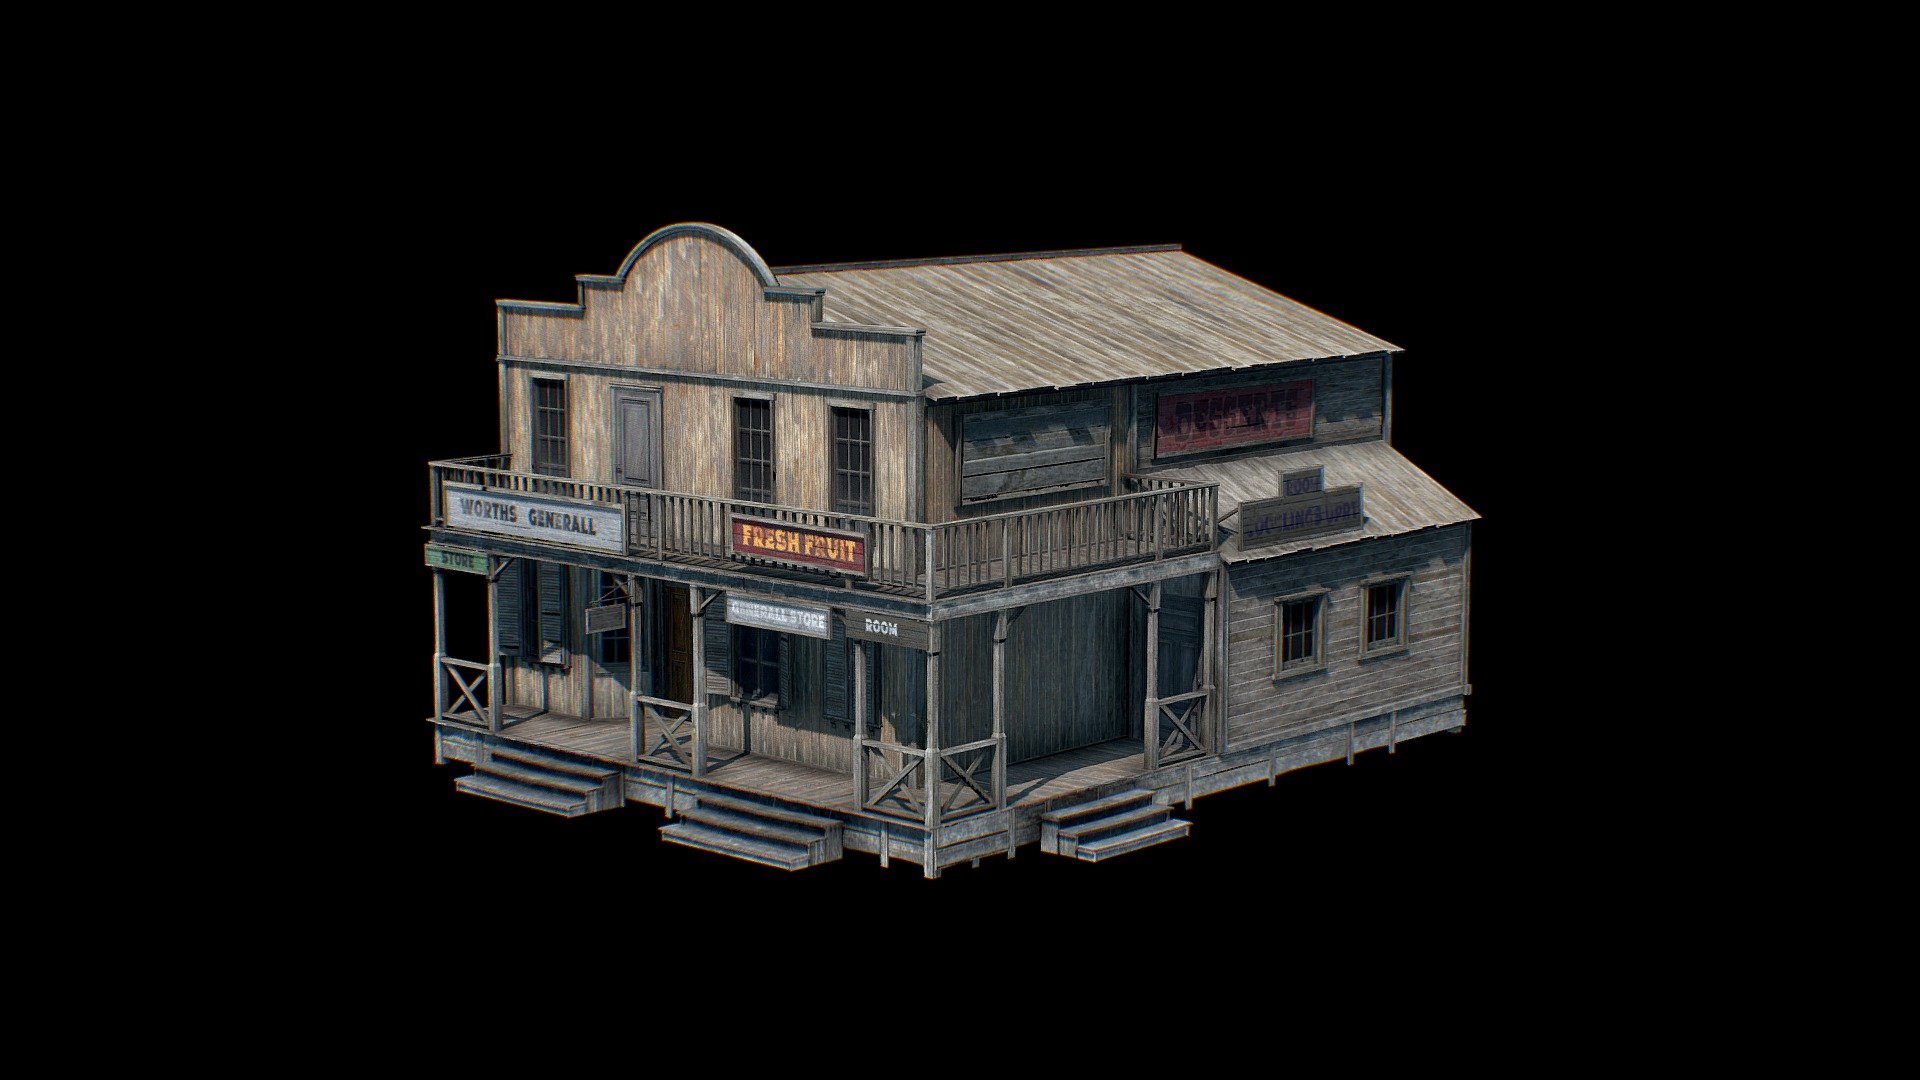 Free download：www.freepoly.org

If you like,Buy me a coffee maybe? https://www.buymeacoffee.com/riveryang - Wild West Building-Freepoly.org - Download Free 3D model by Freepoly.org (@blackrray) 3d model